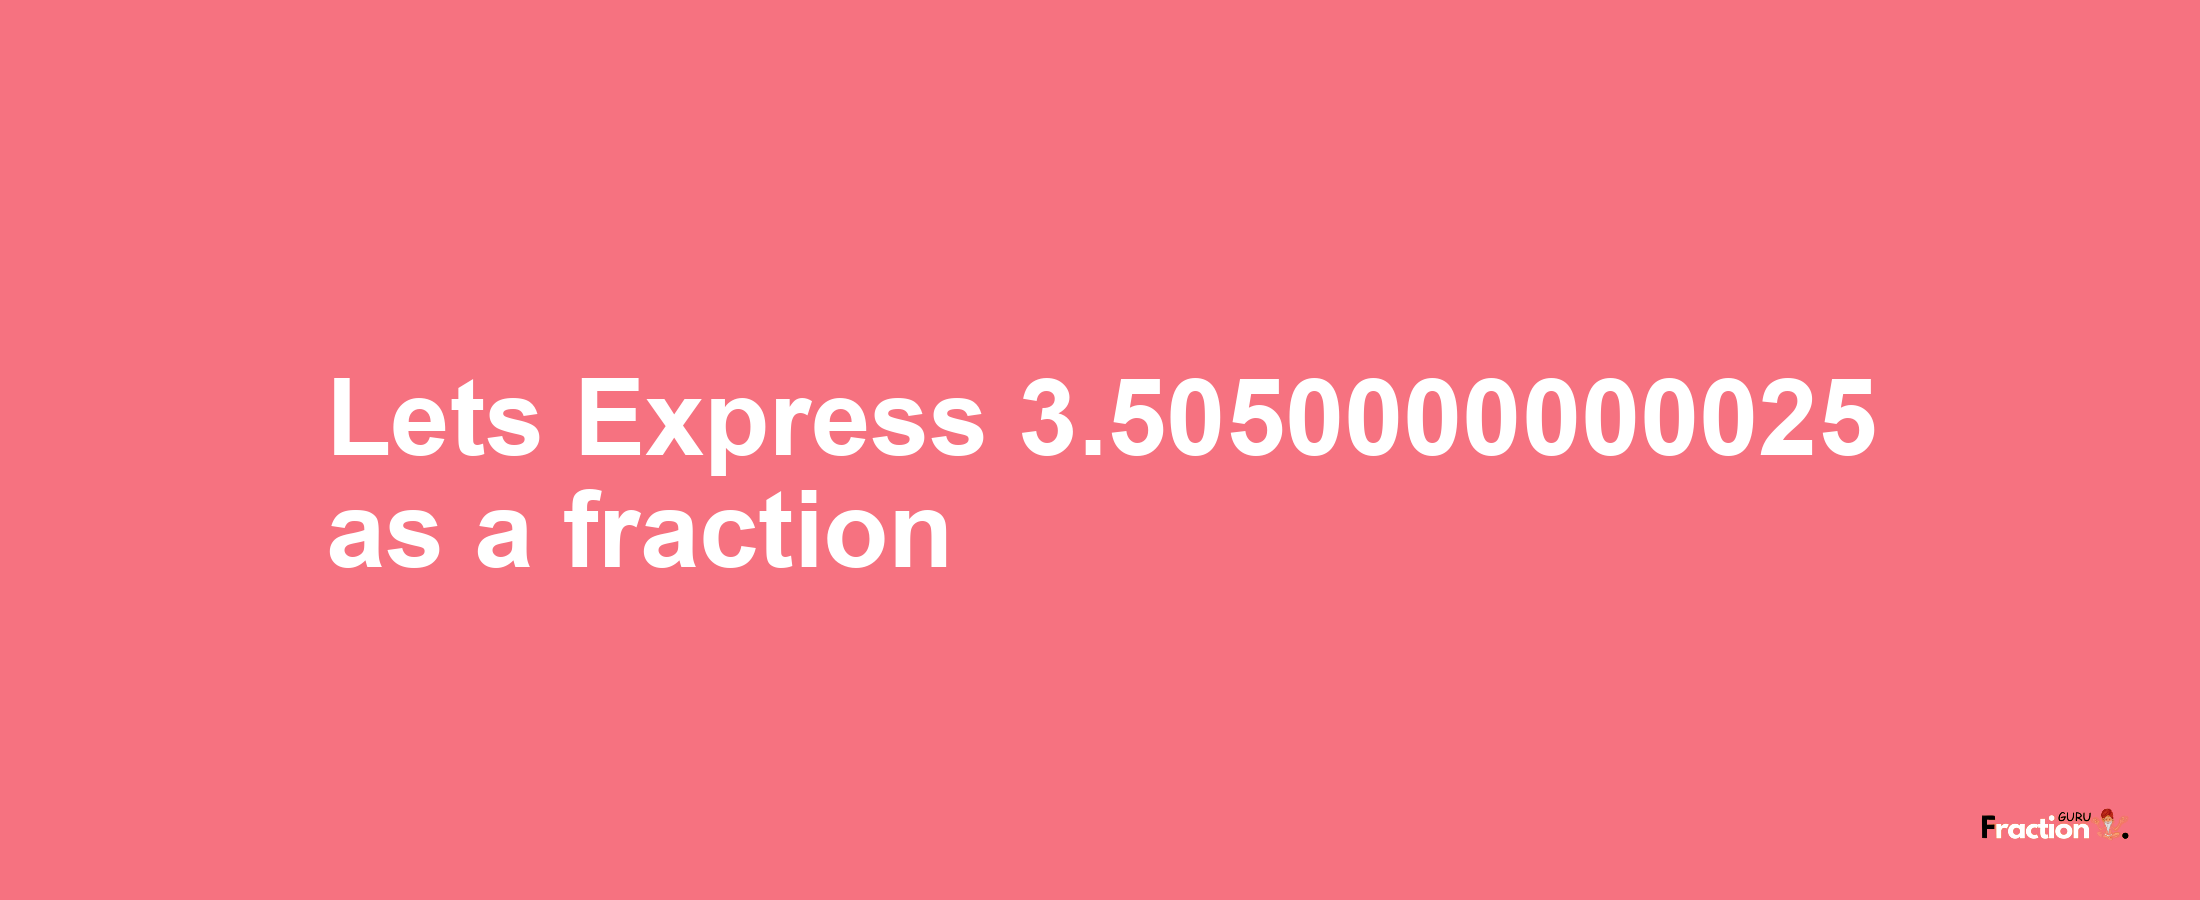 Lets Express 3.5050000000025 as afraction